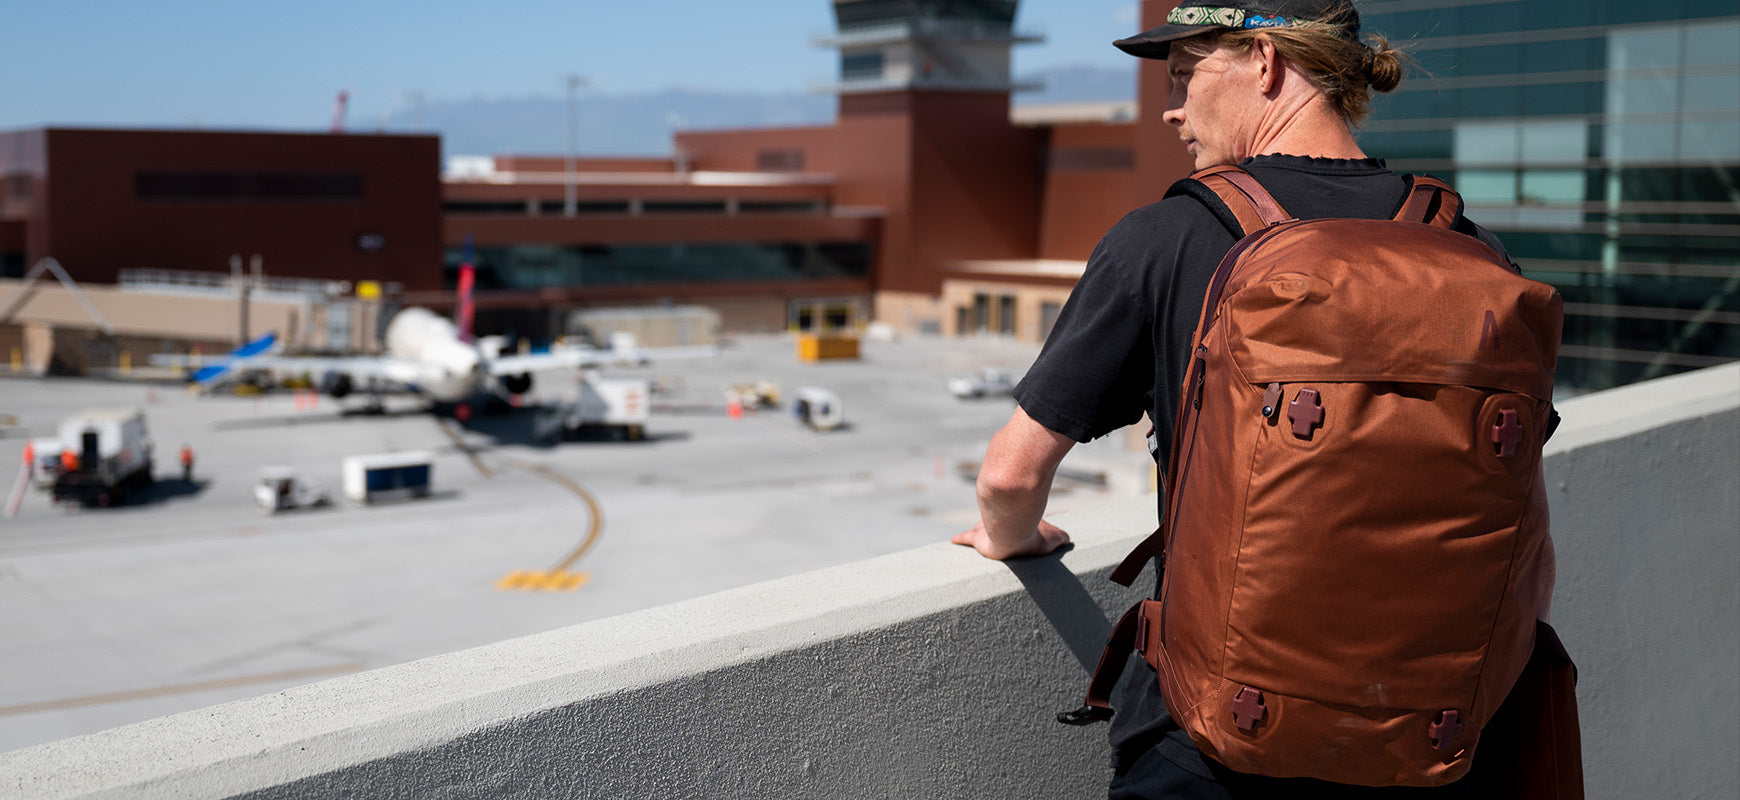 A man in a black shirt and hat stares across an airport with his Arris Pack on his back.